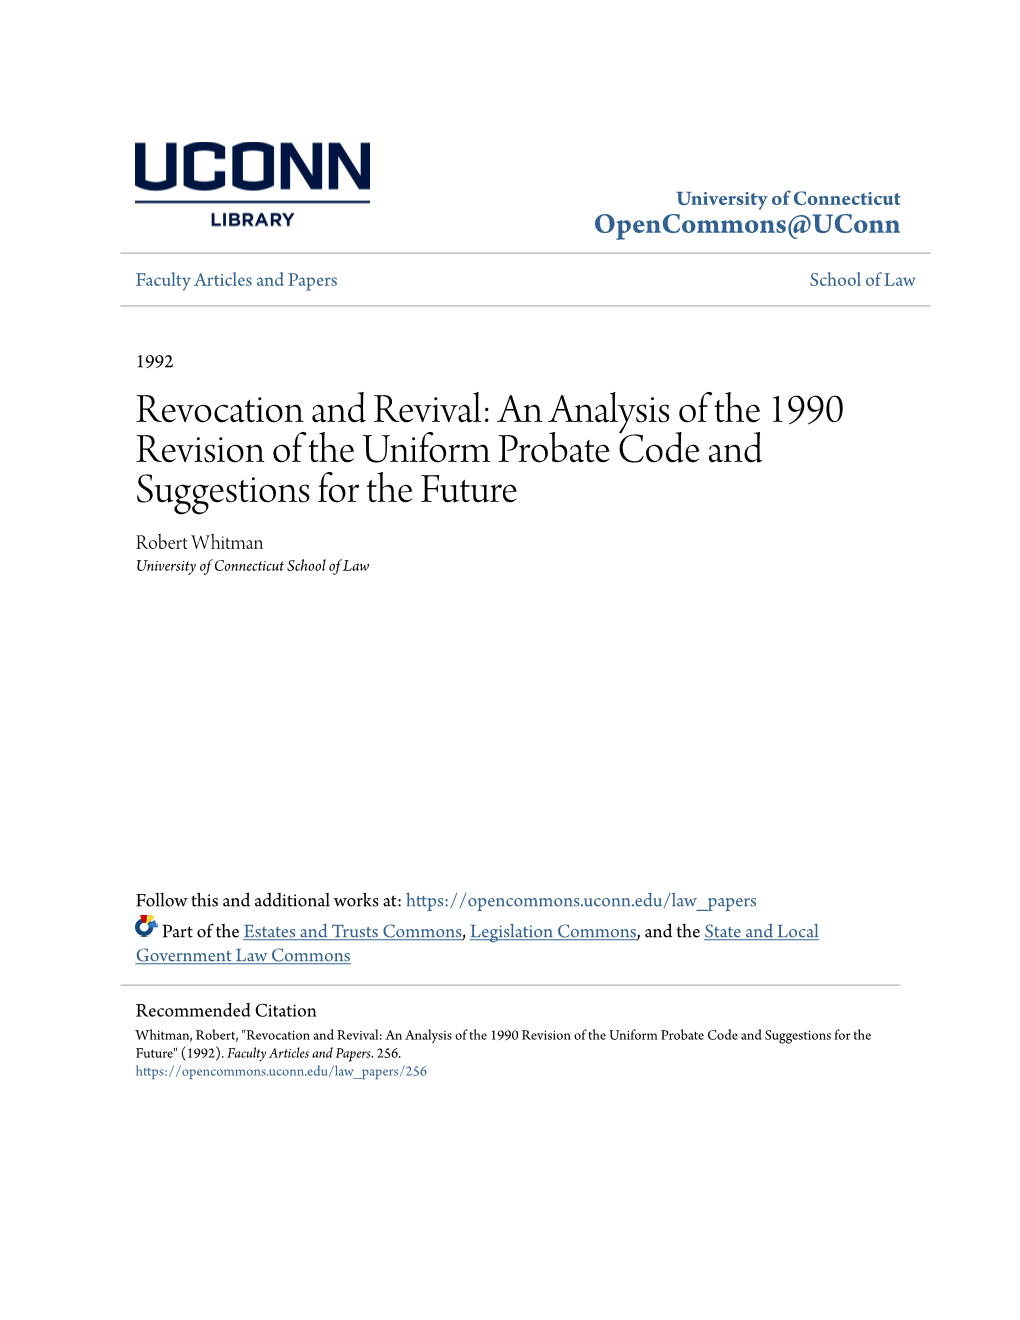 Revocation and Revival: an Analysis of the 1990 Revision of the Uniform